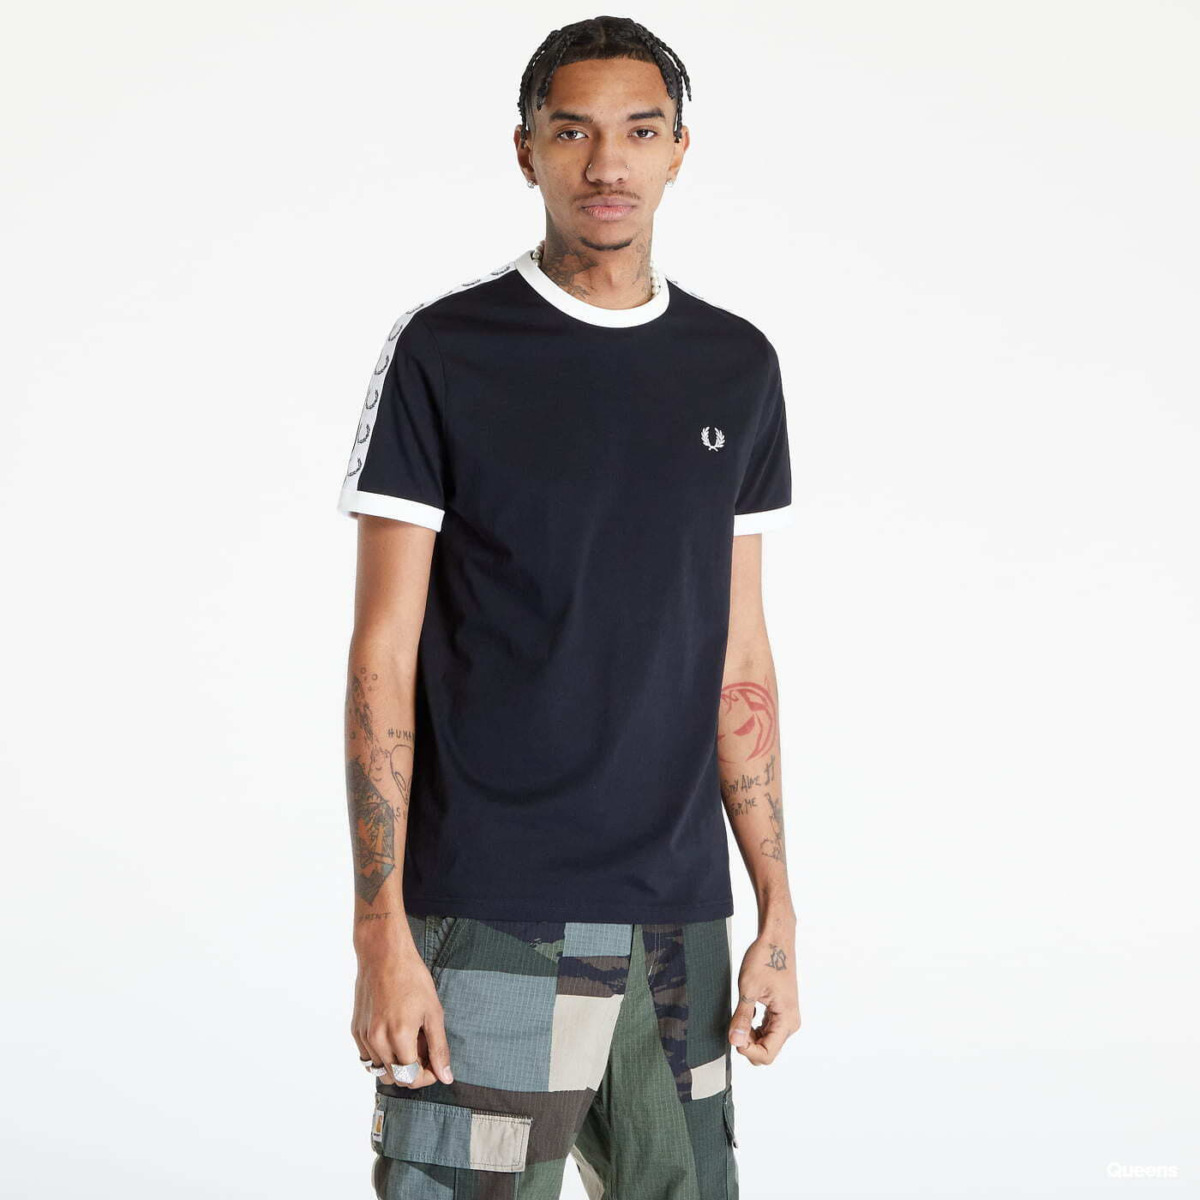 Fred Perry Mens Top in Black by Footshop GOOFASH